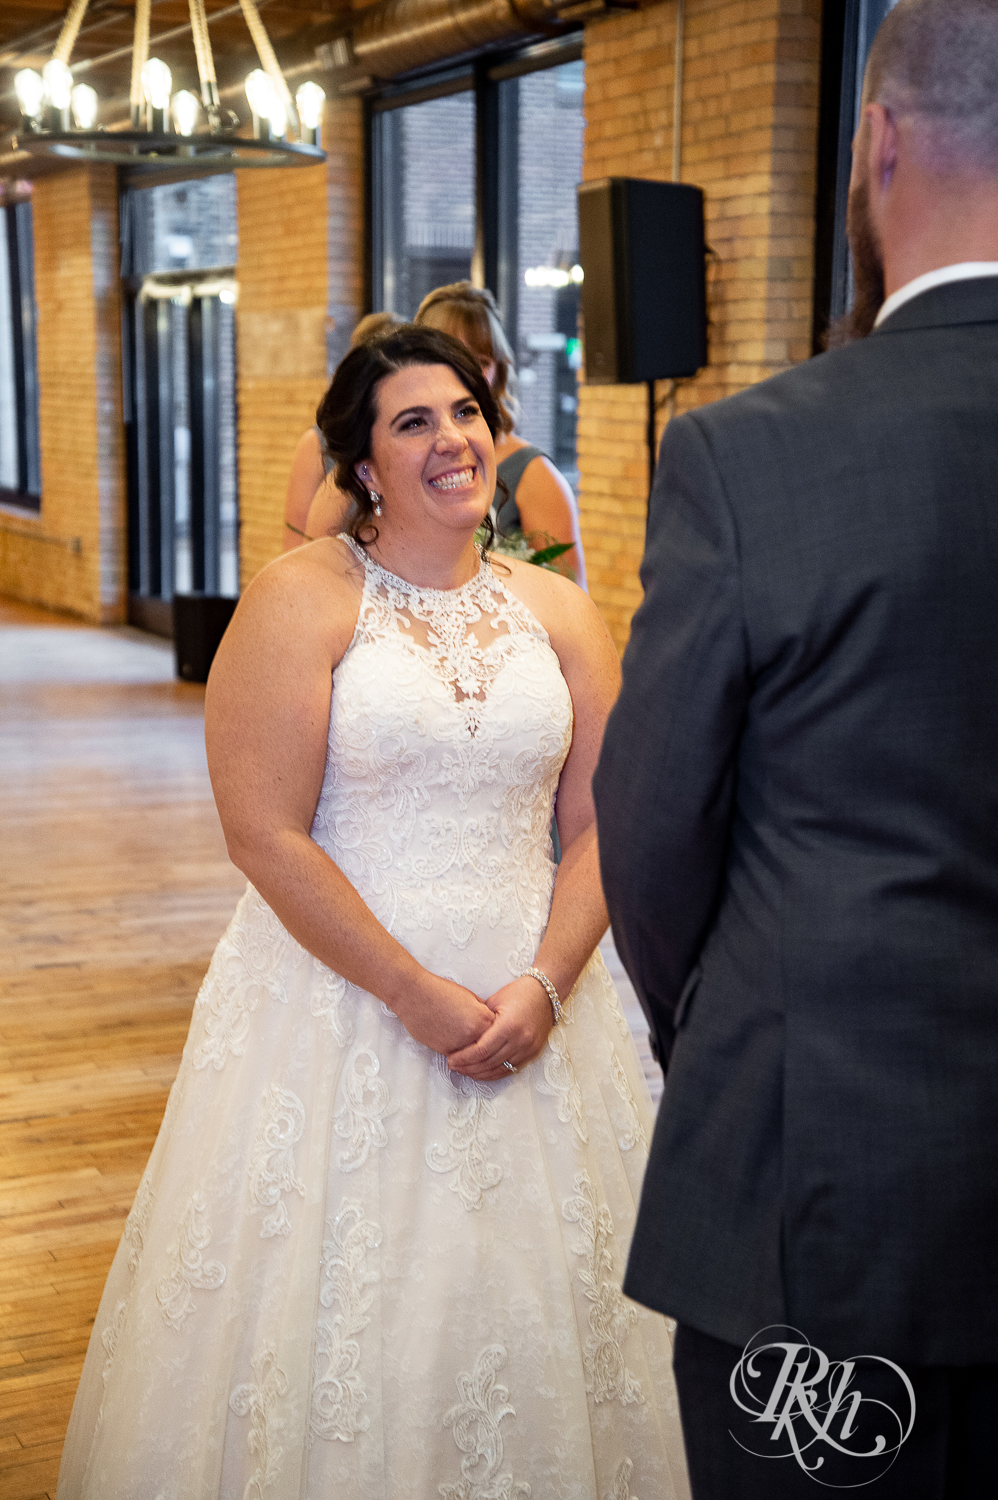 Bride and groom smile during wedding ceremony at Minneapolis Event Centers in Minneapolis, Minnesota.